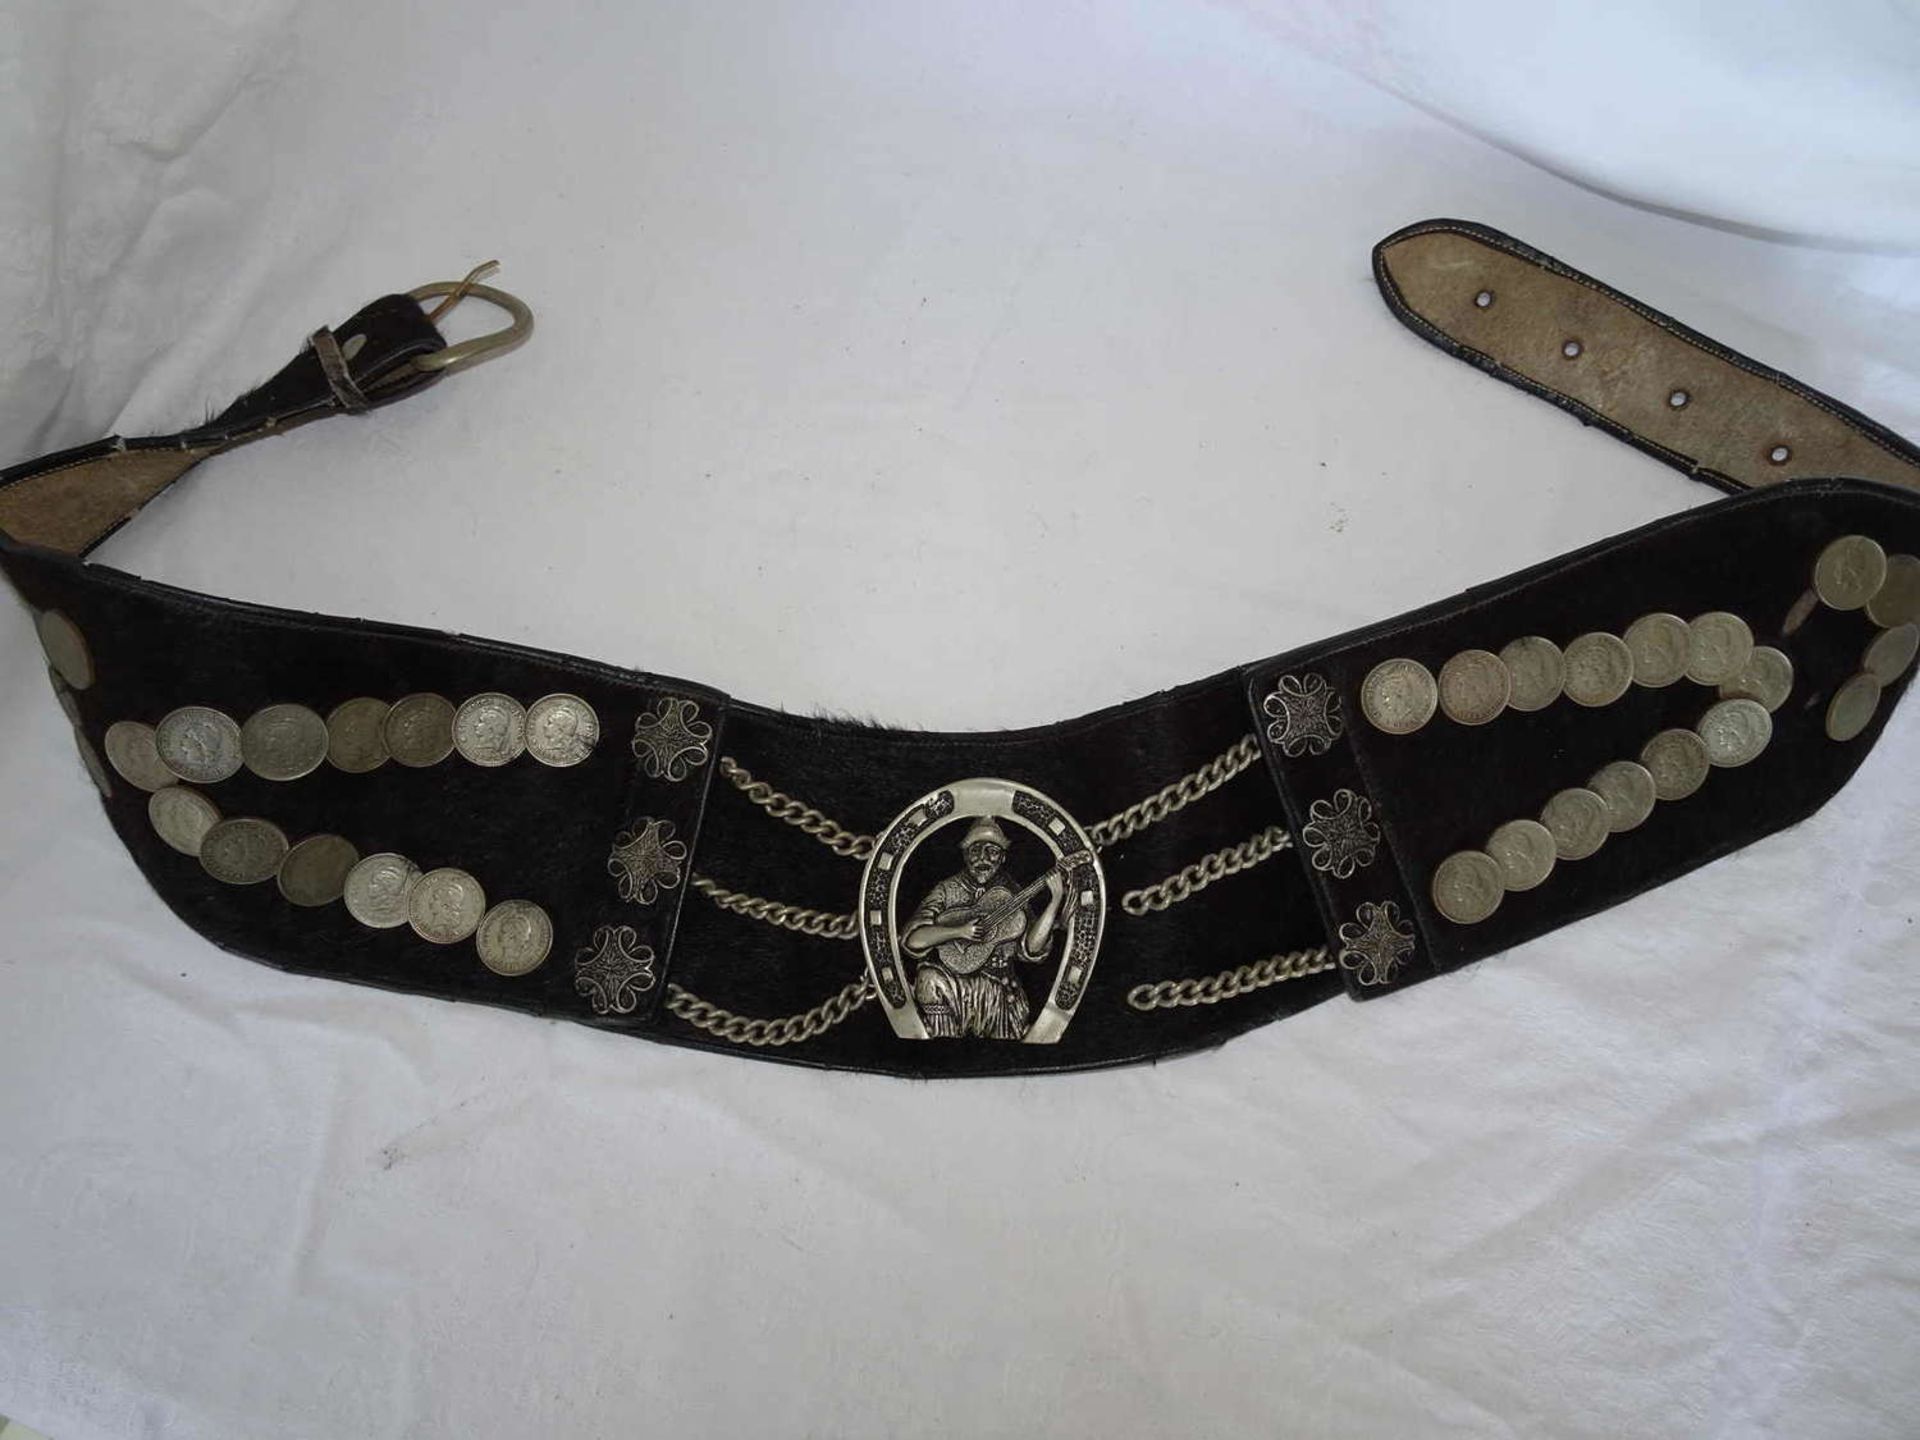 1 older Gaucho belt from Argentina, original from the period, equipped with coins. The focus is on